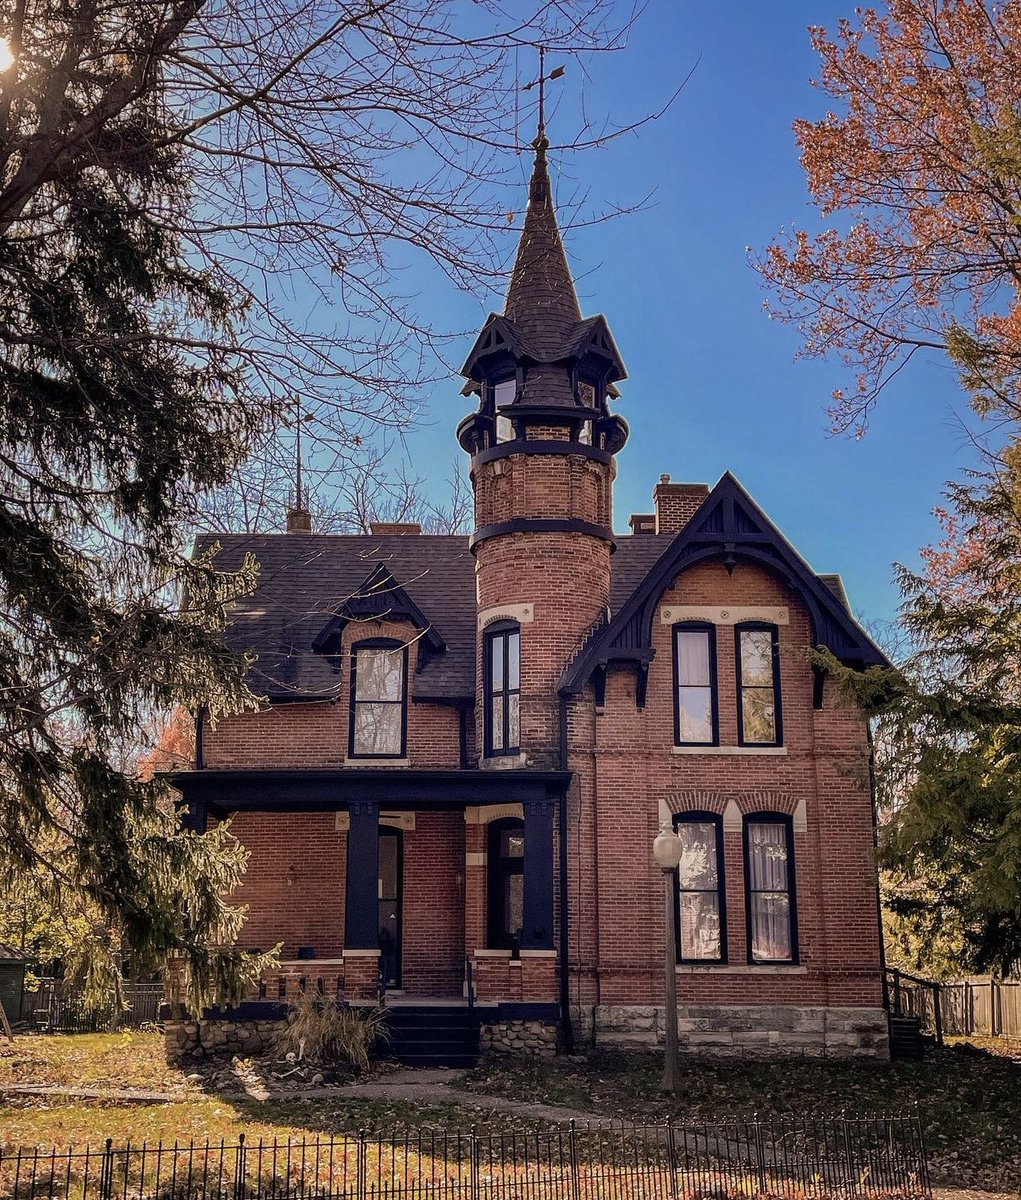 #gothicarchitecture